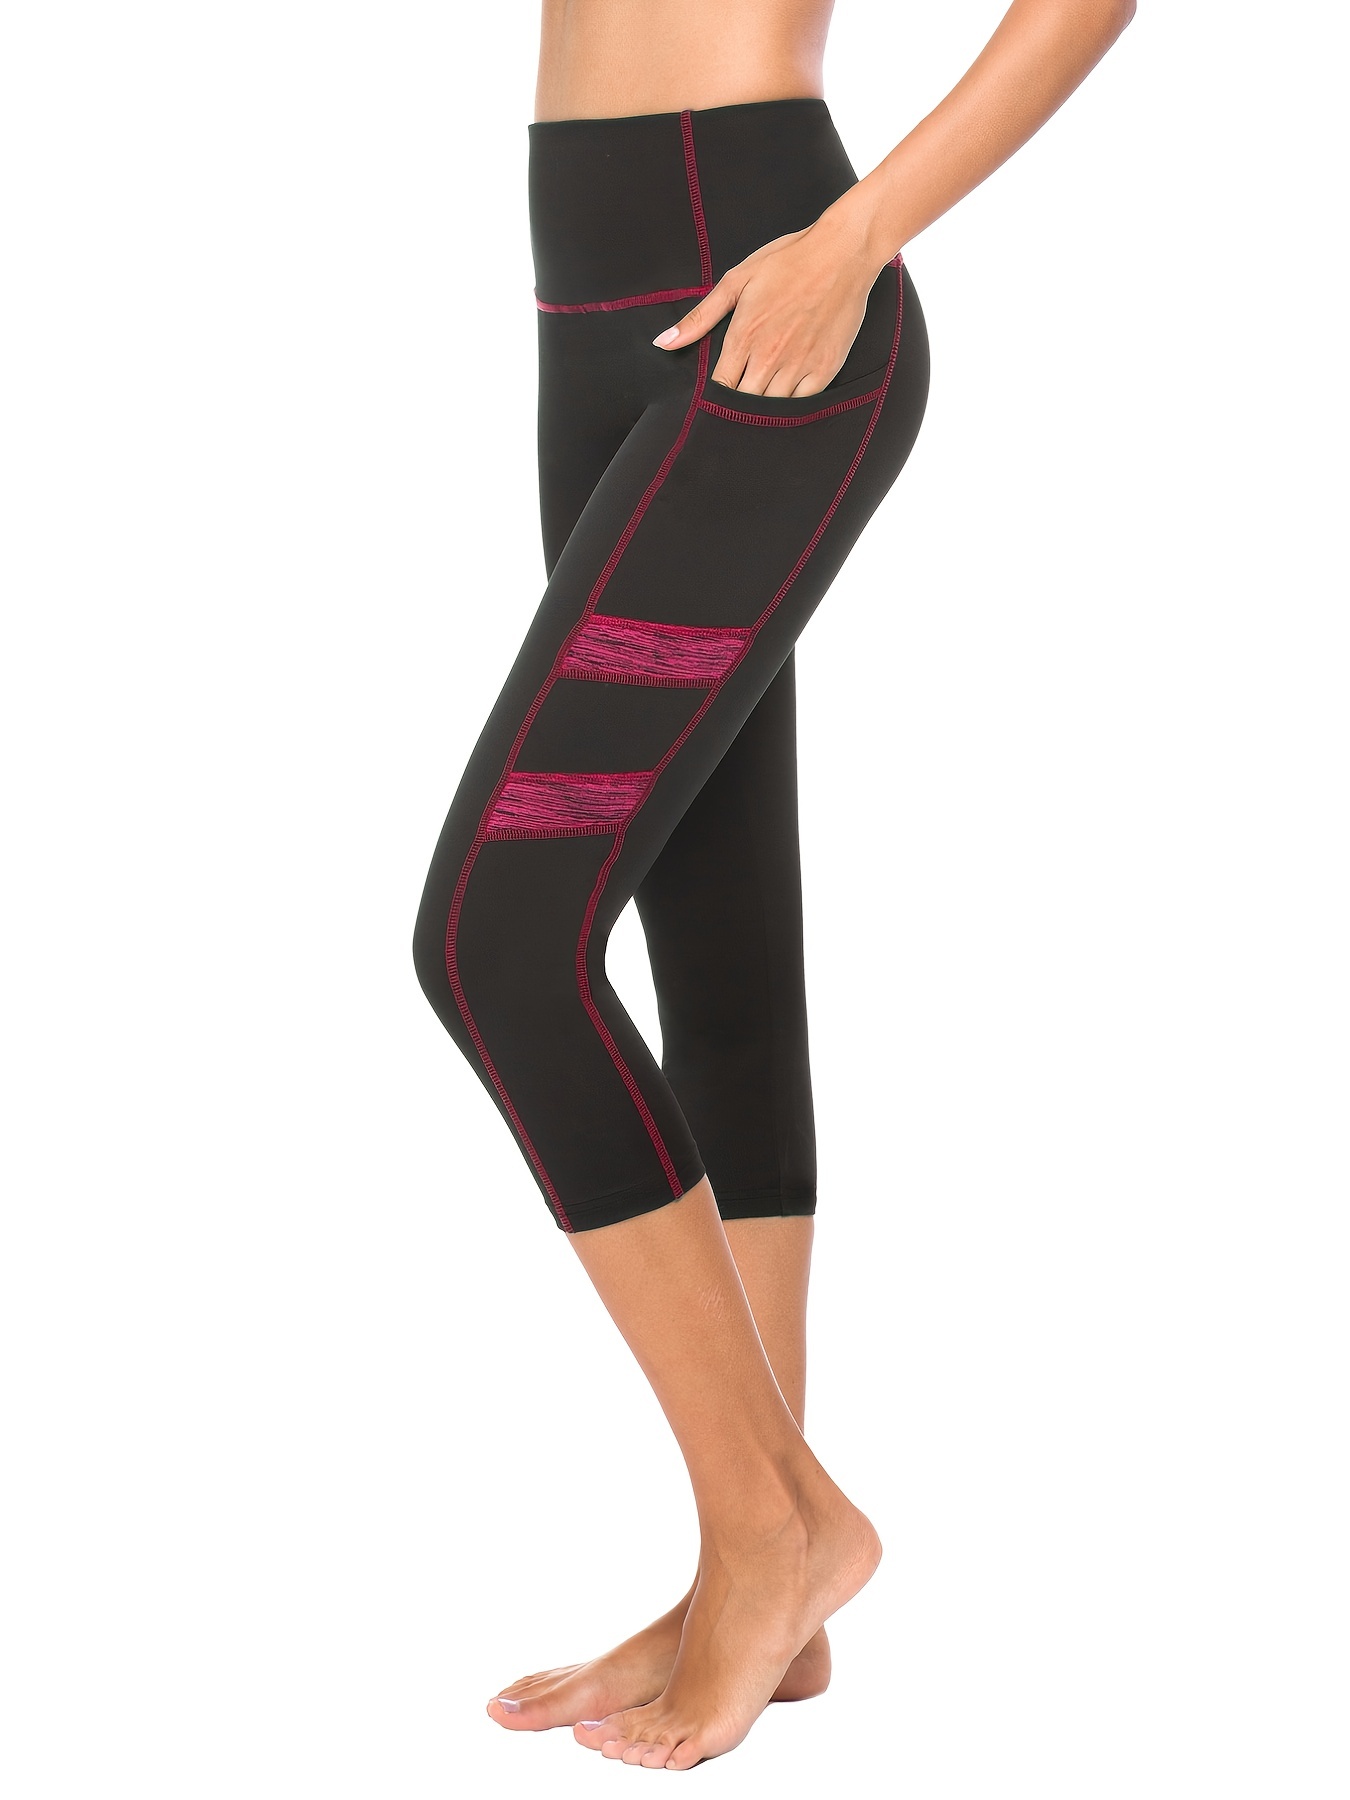 High-Waisted Yoga Capri Leggings with Side Pockets for Women -  Moisture-Wicking and Breathable Activewear for Fitness and Sports